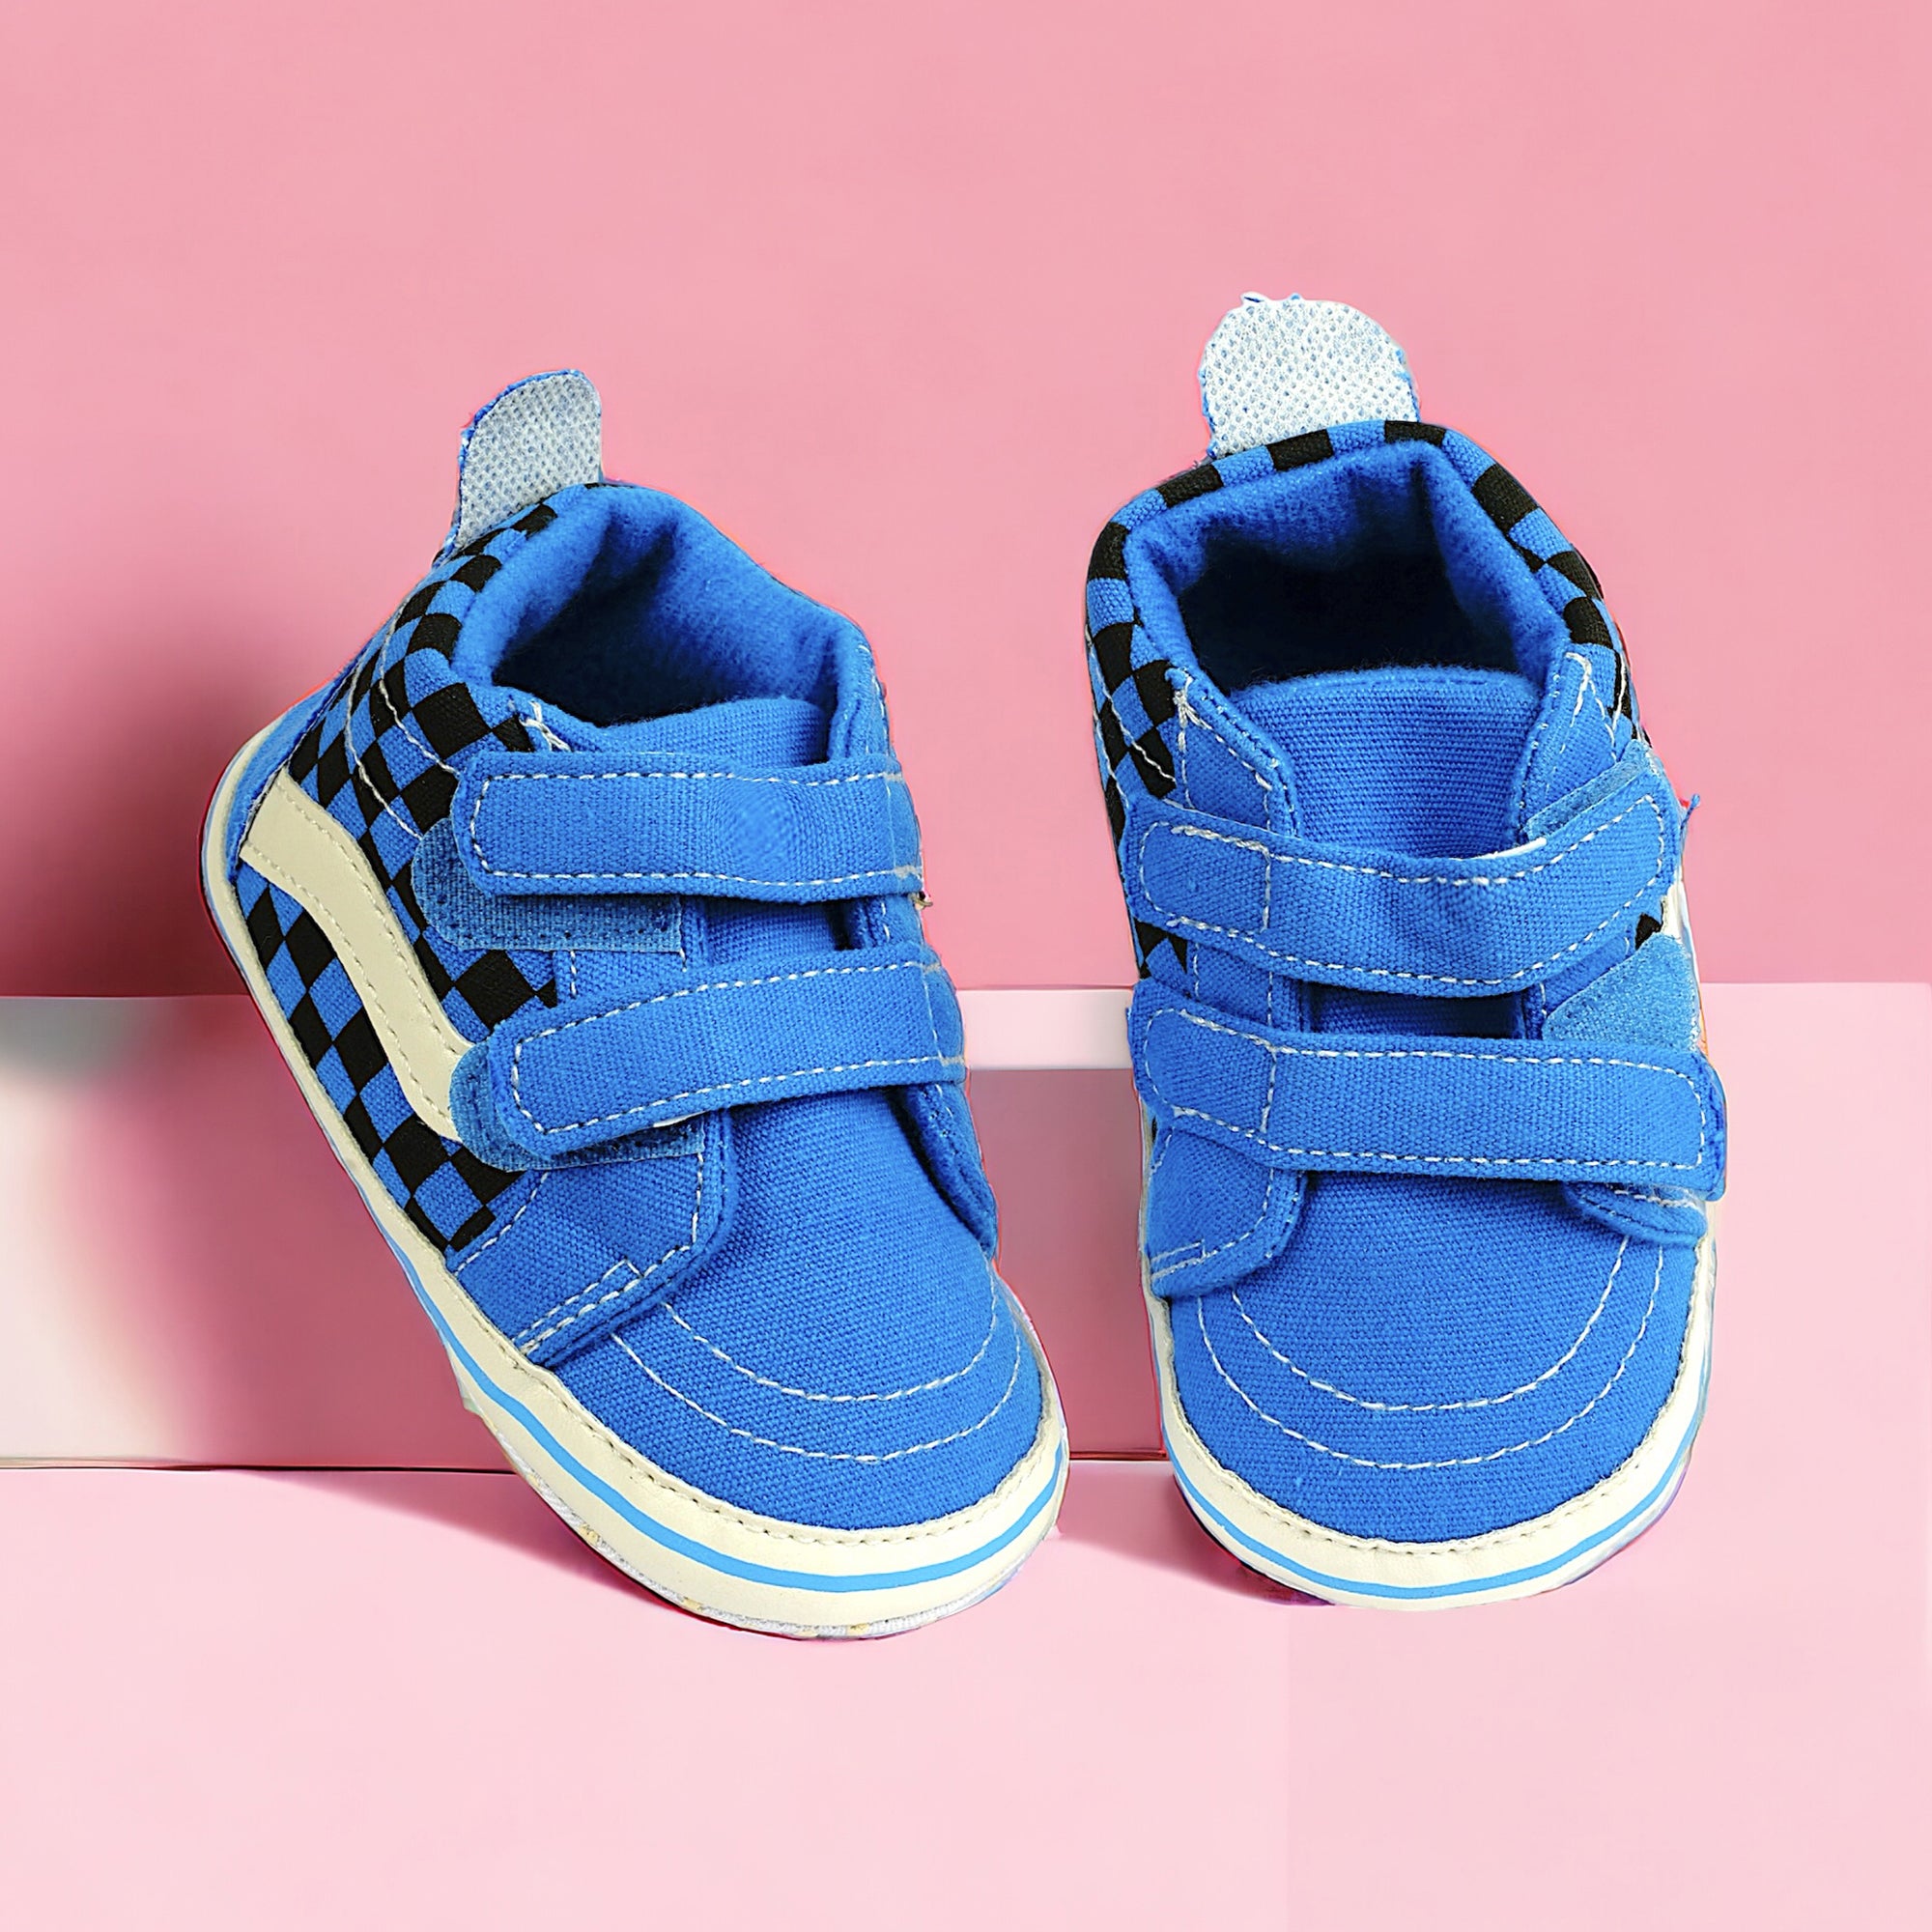 Baby Moo Stylish Casual Velcro Straps Anti-Skid Sneakers - Blue